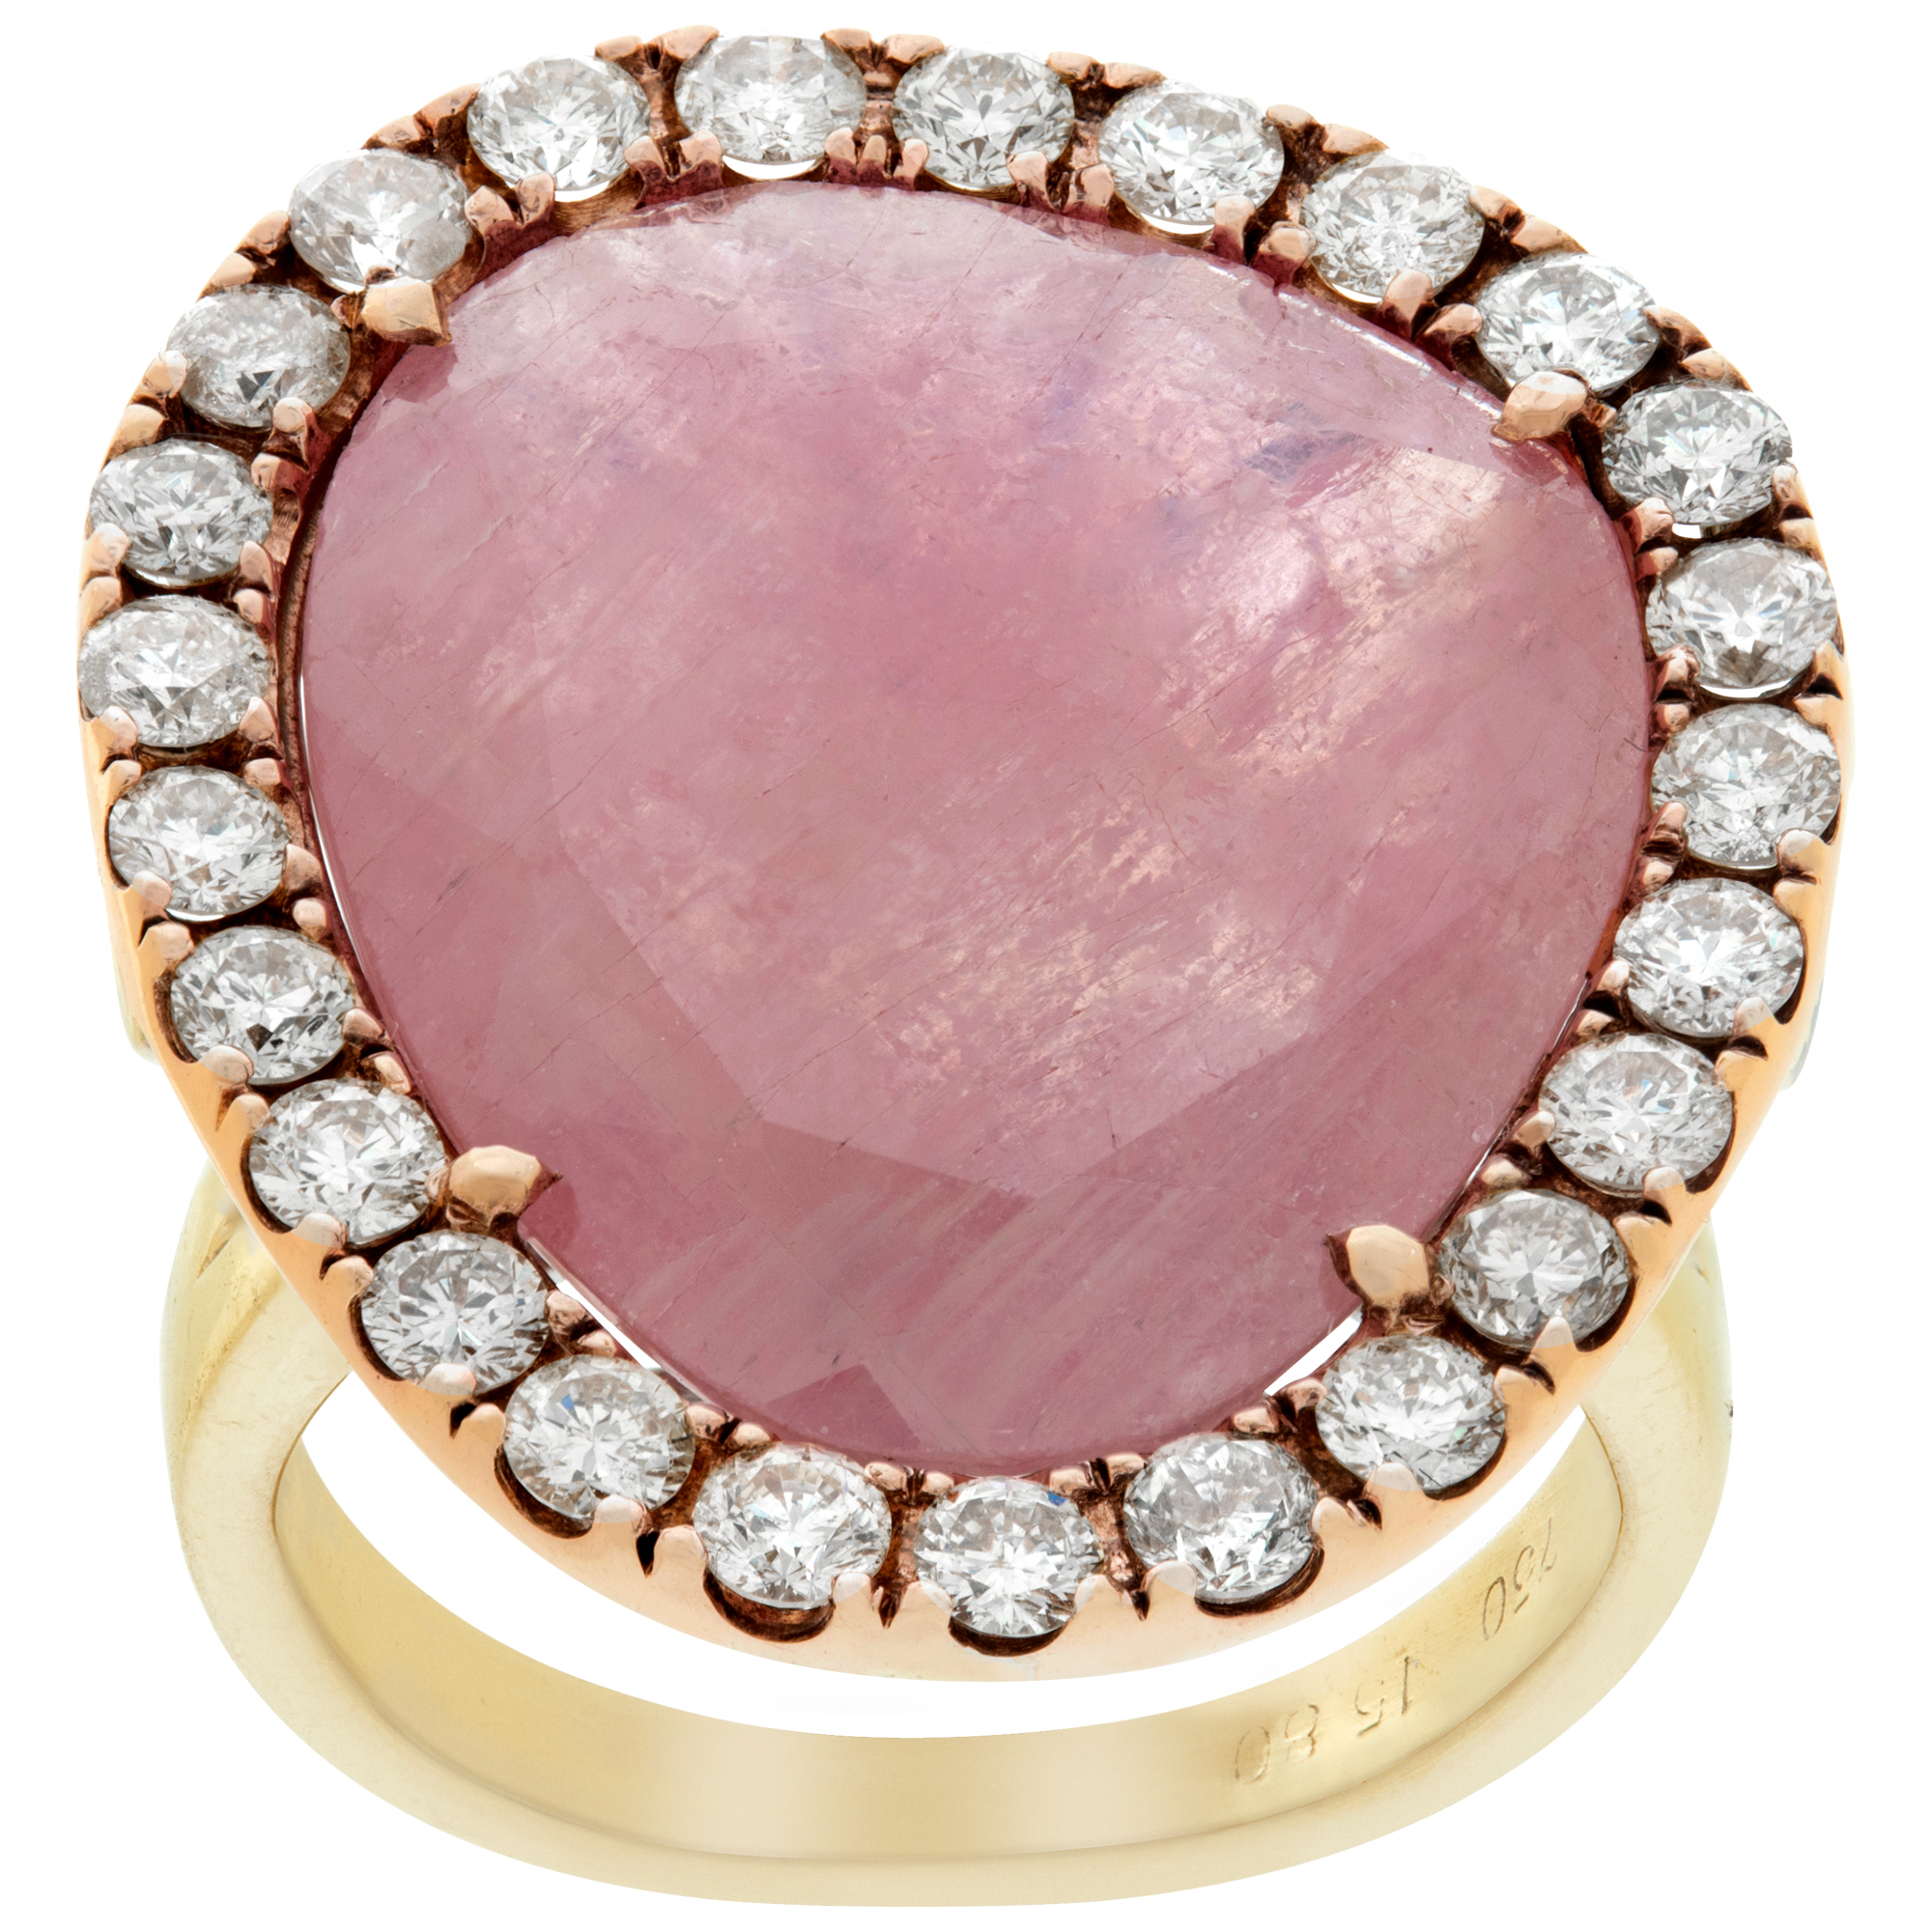 Rose quartz faceted ring with 1.00ct in surrounding diamonds in 18k white & rose gold image 1